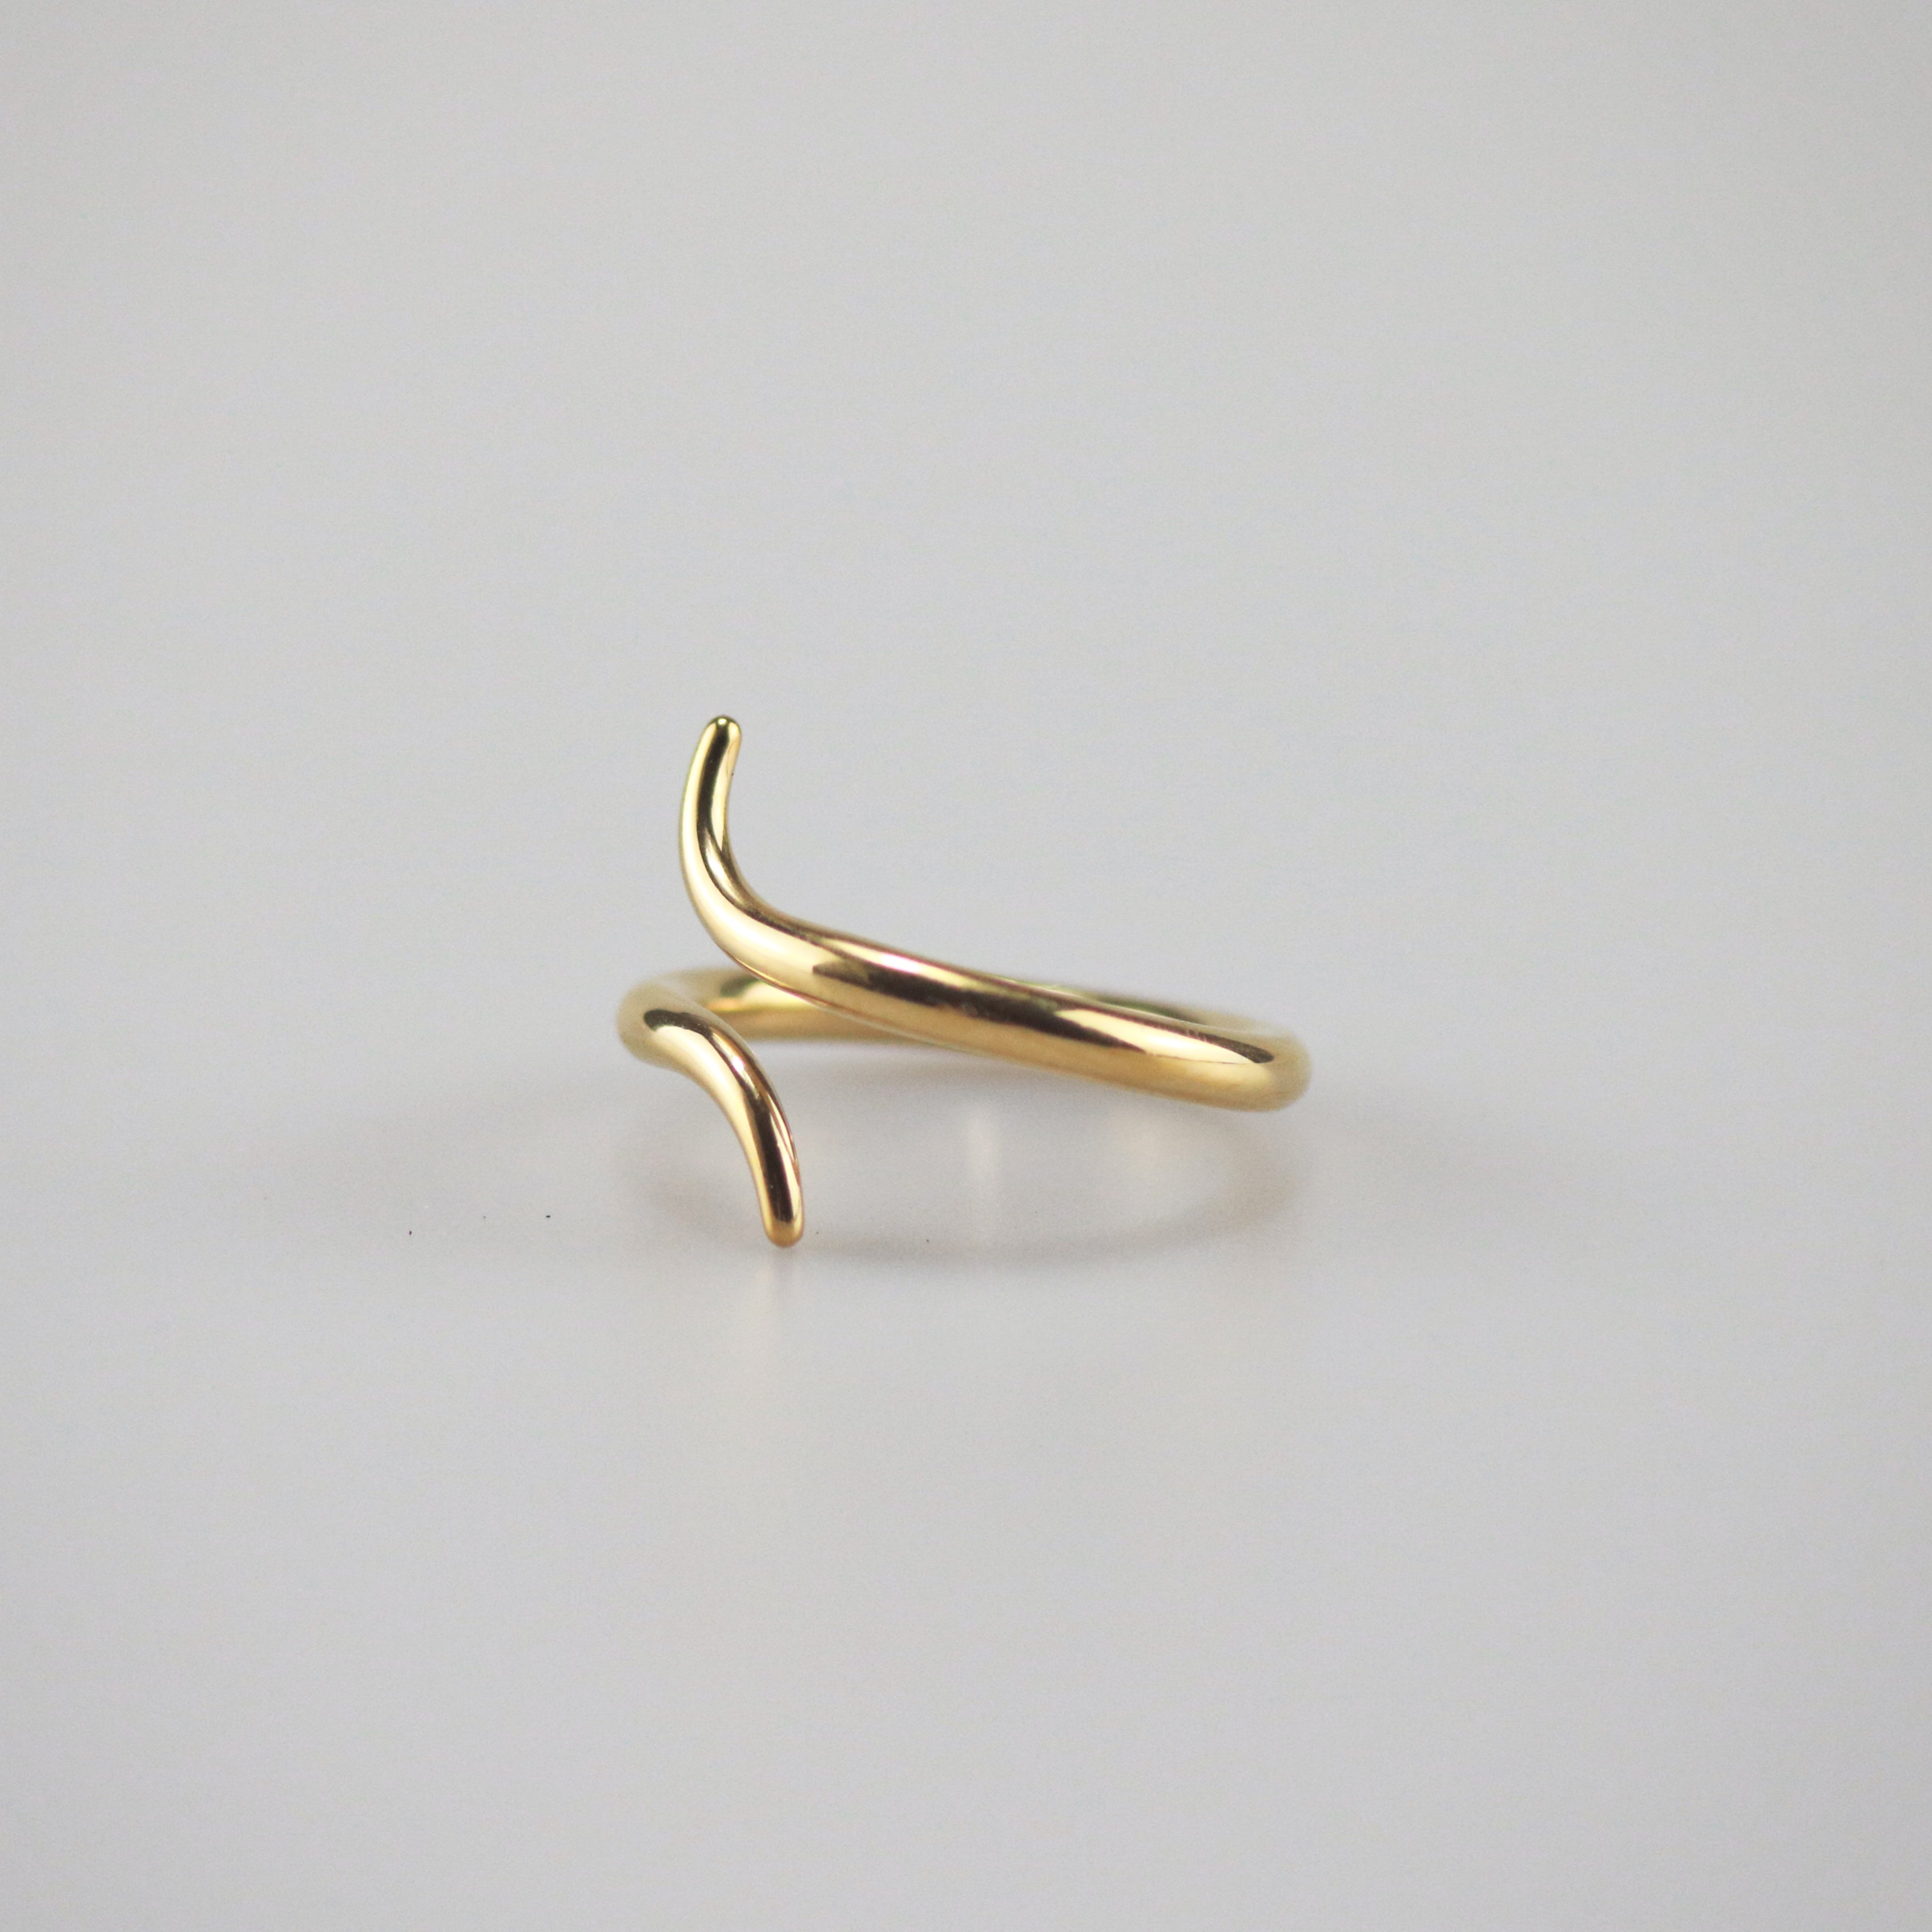 Meideya Jewelry Claw Ring in 18k gold plated stainless steel